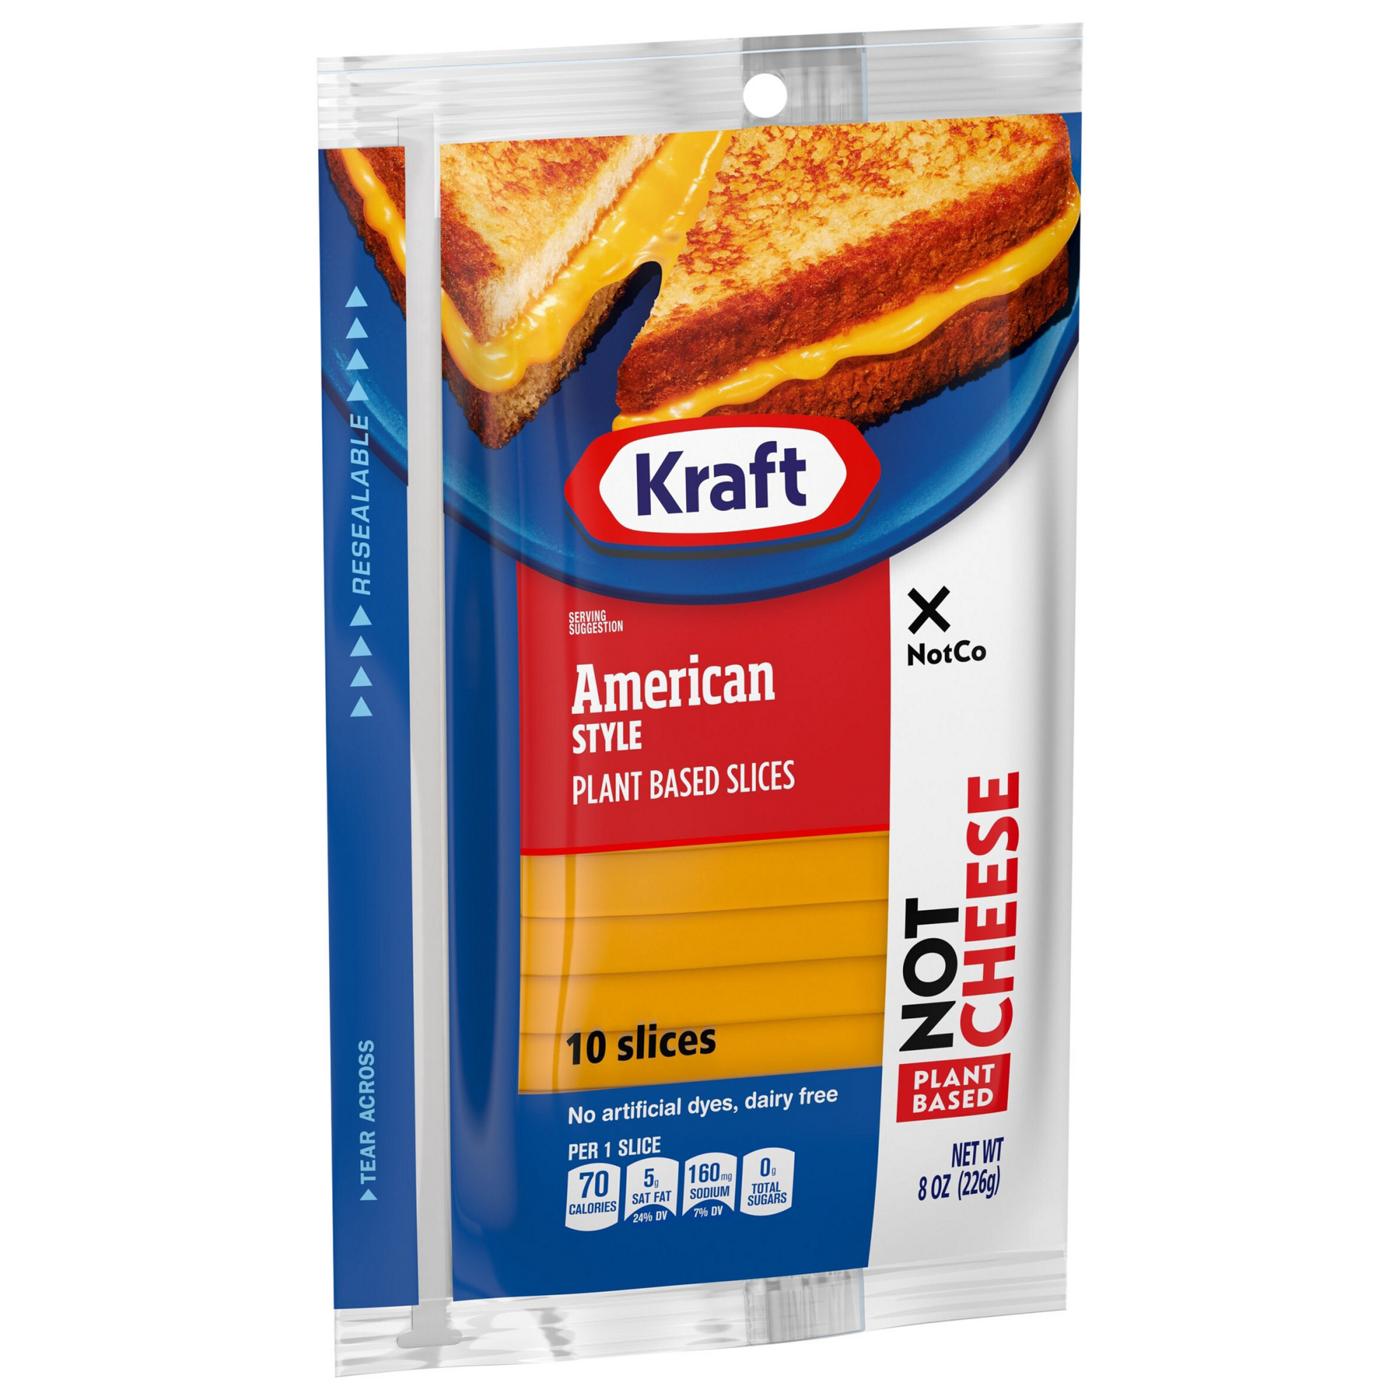 Kraft Not Cheese Plant Based Slices - American Style; image 8 of 8